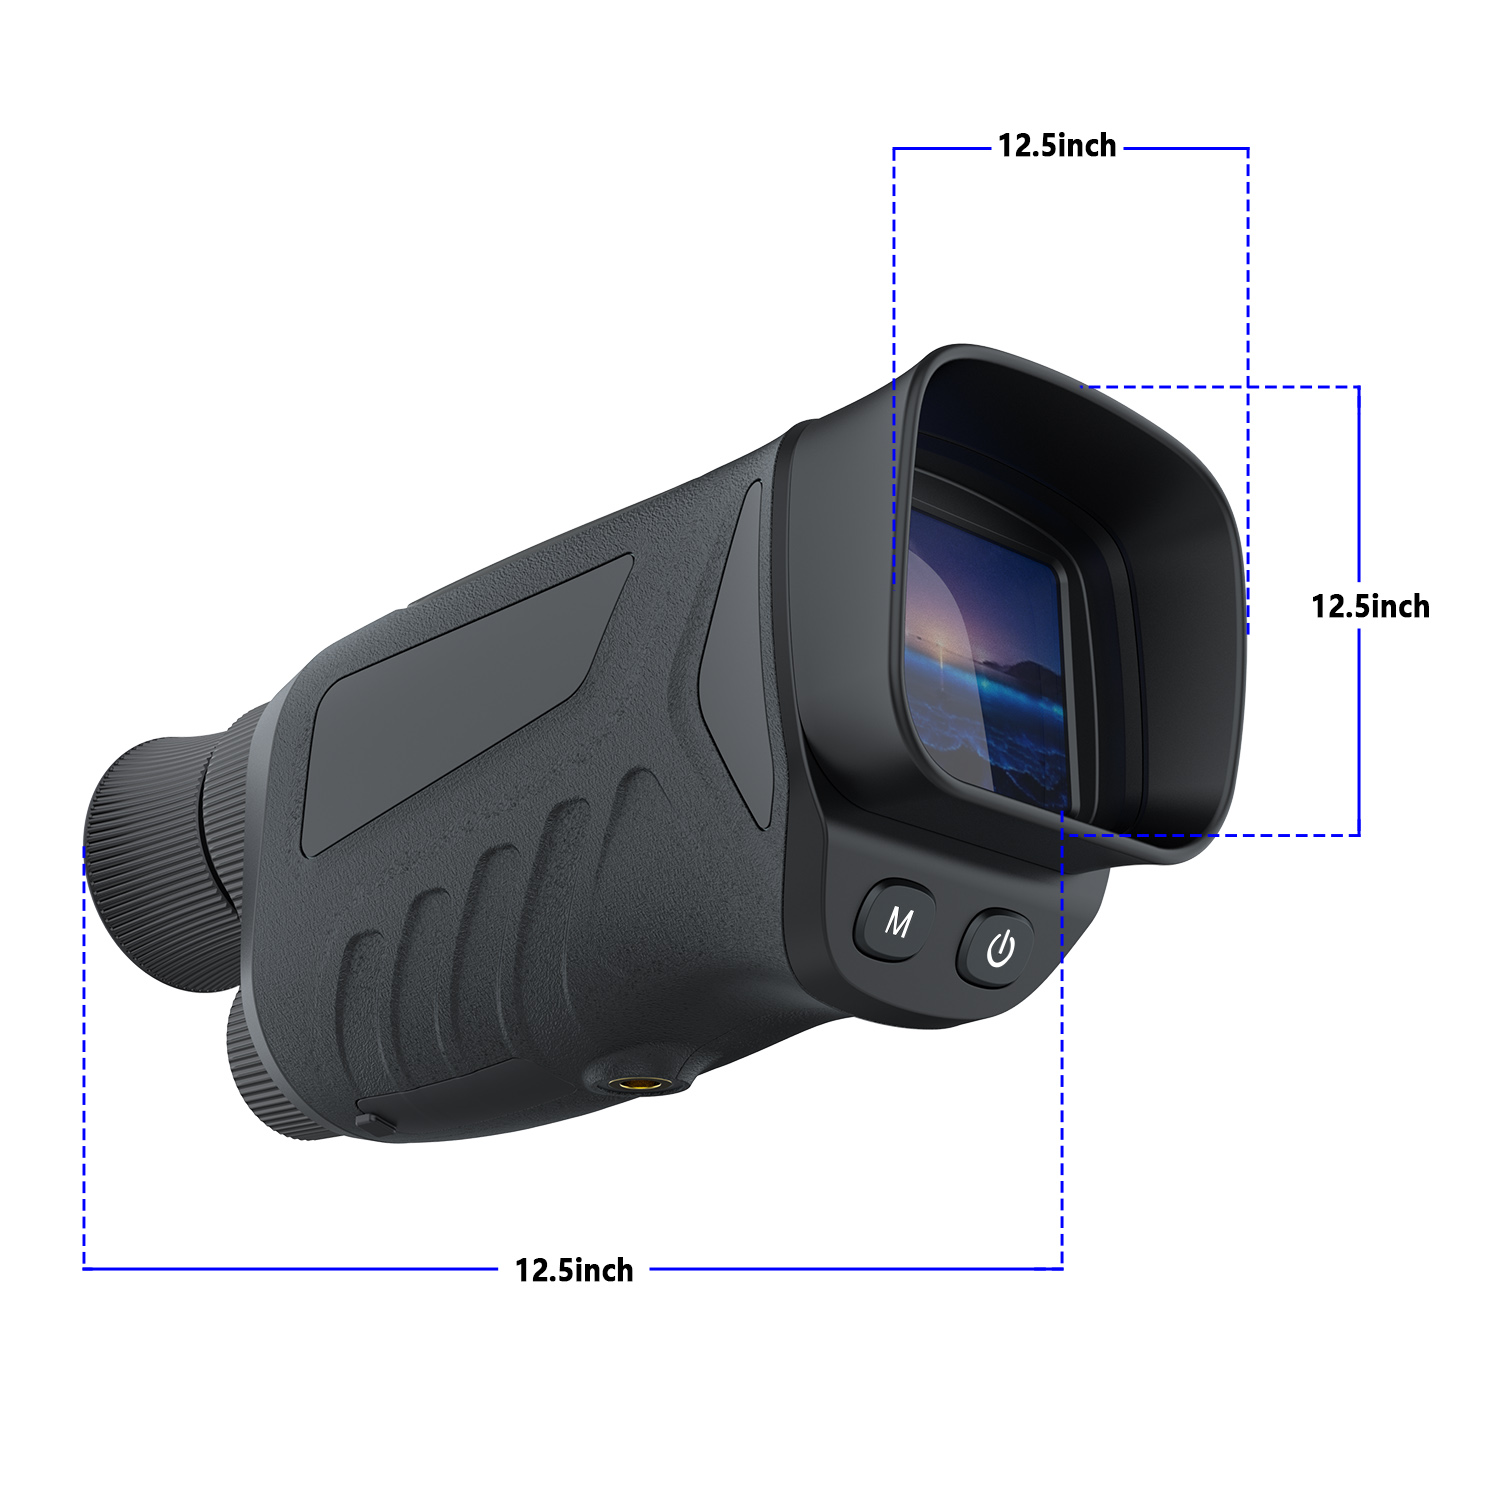 2.0 inches LCD Display Infrared Digital Day Night Vision Monocular with Photo Video Recording DT19